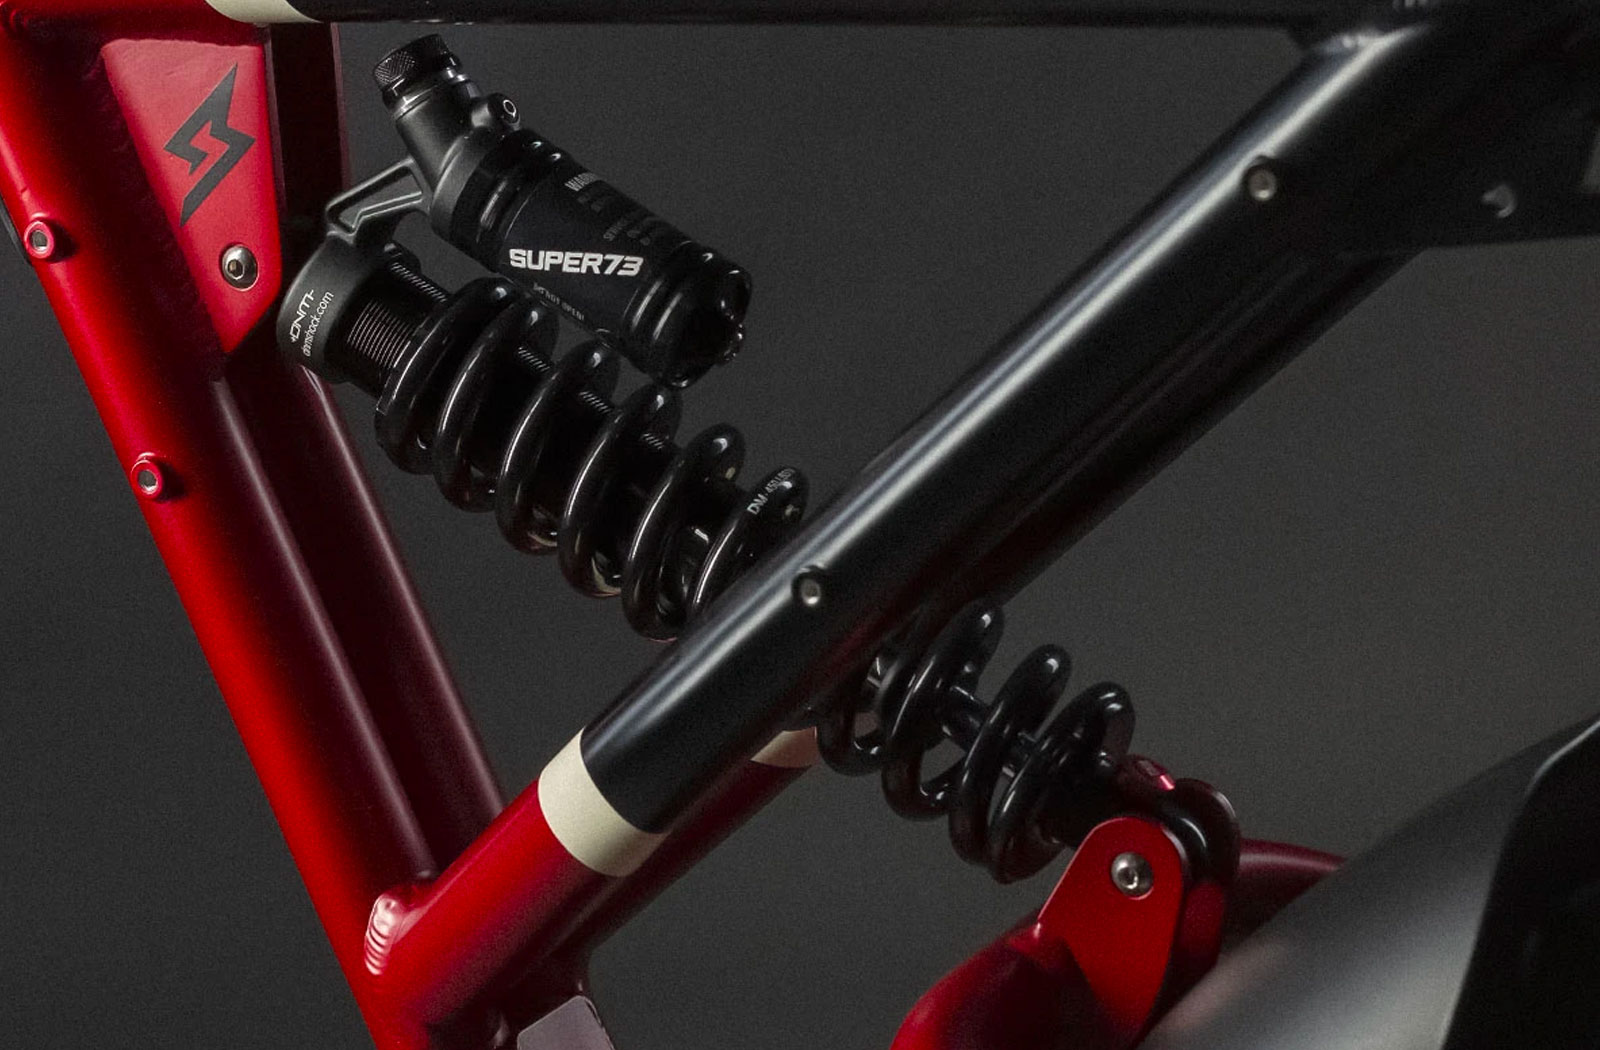 Close-up of rear suspension on Super 73 RX eBike